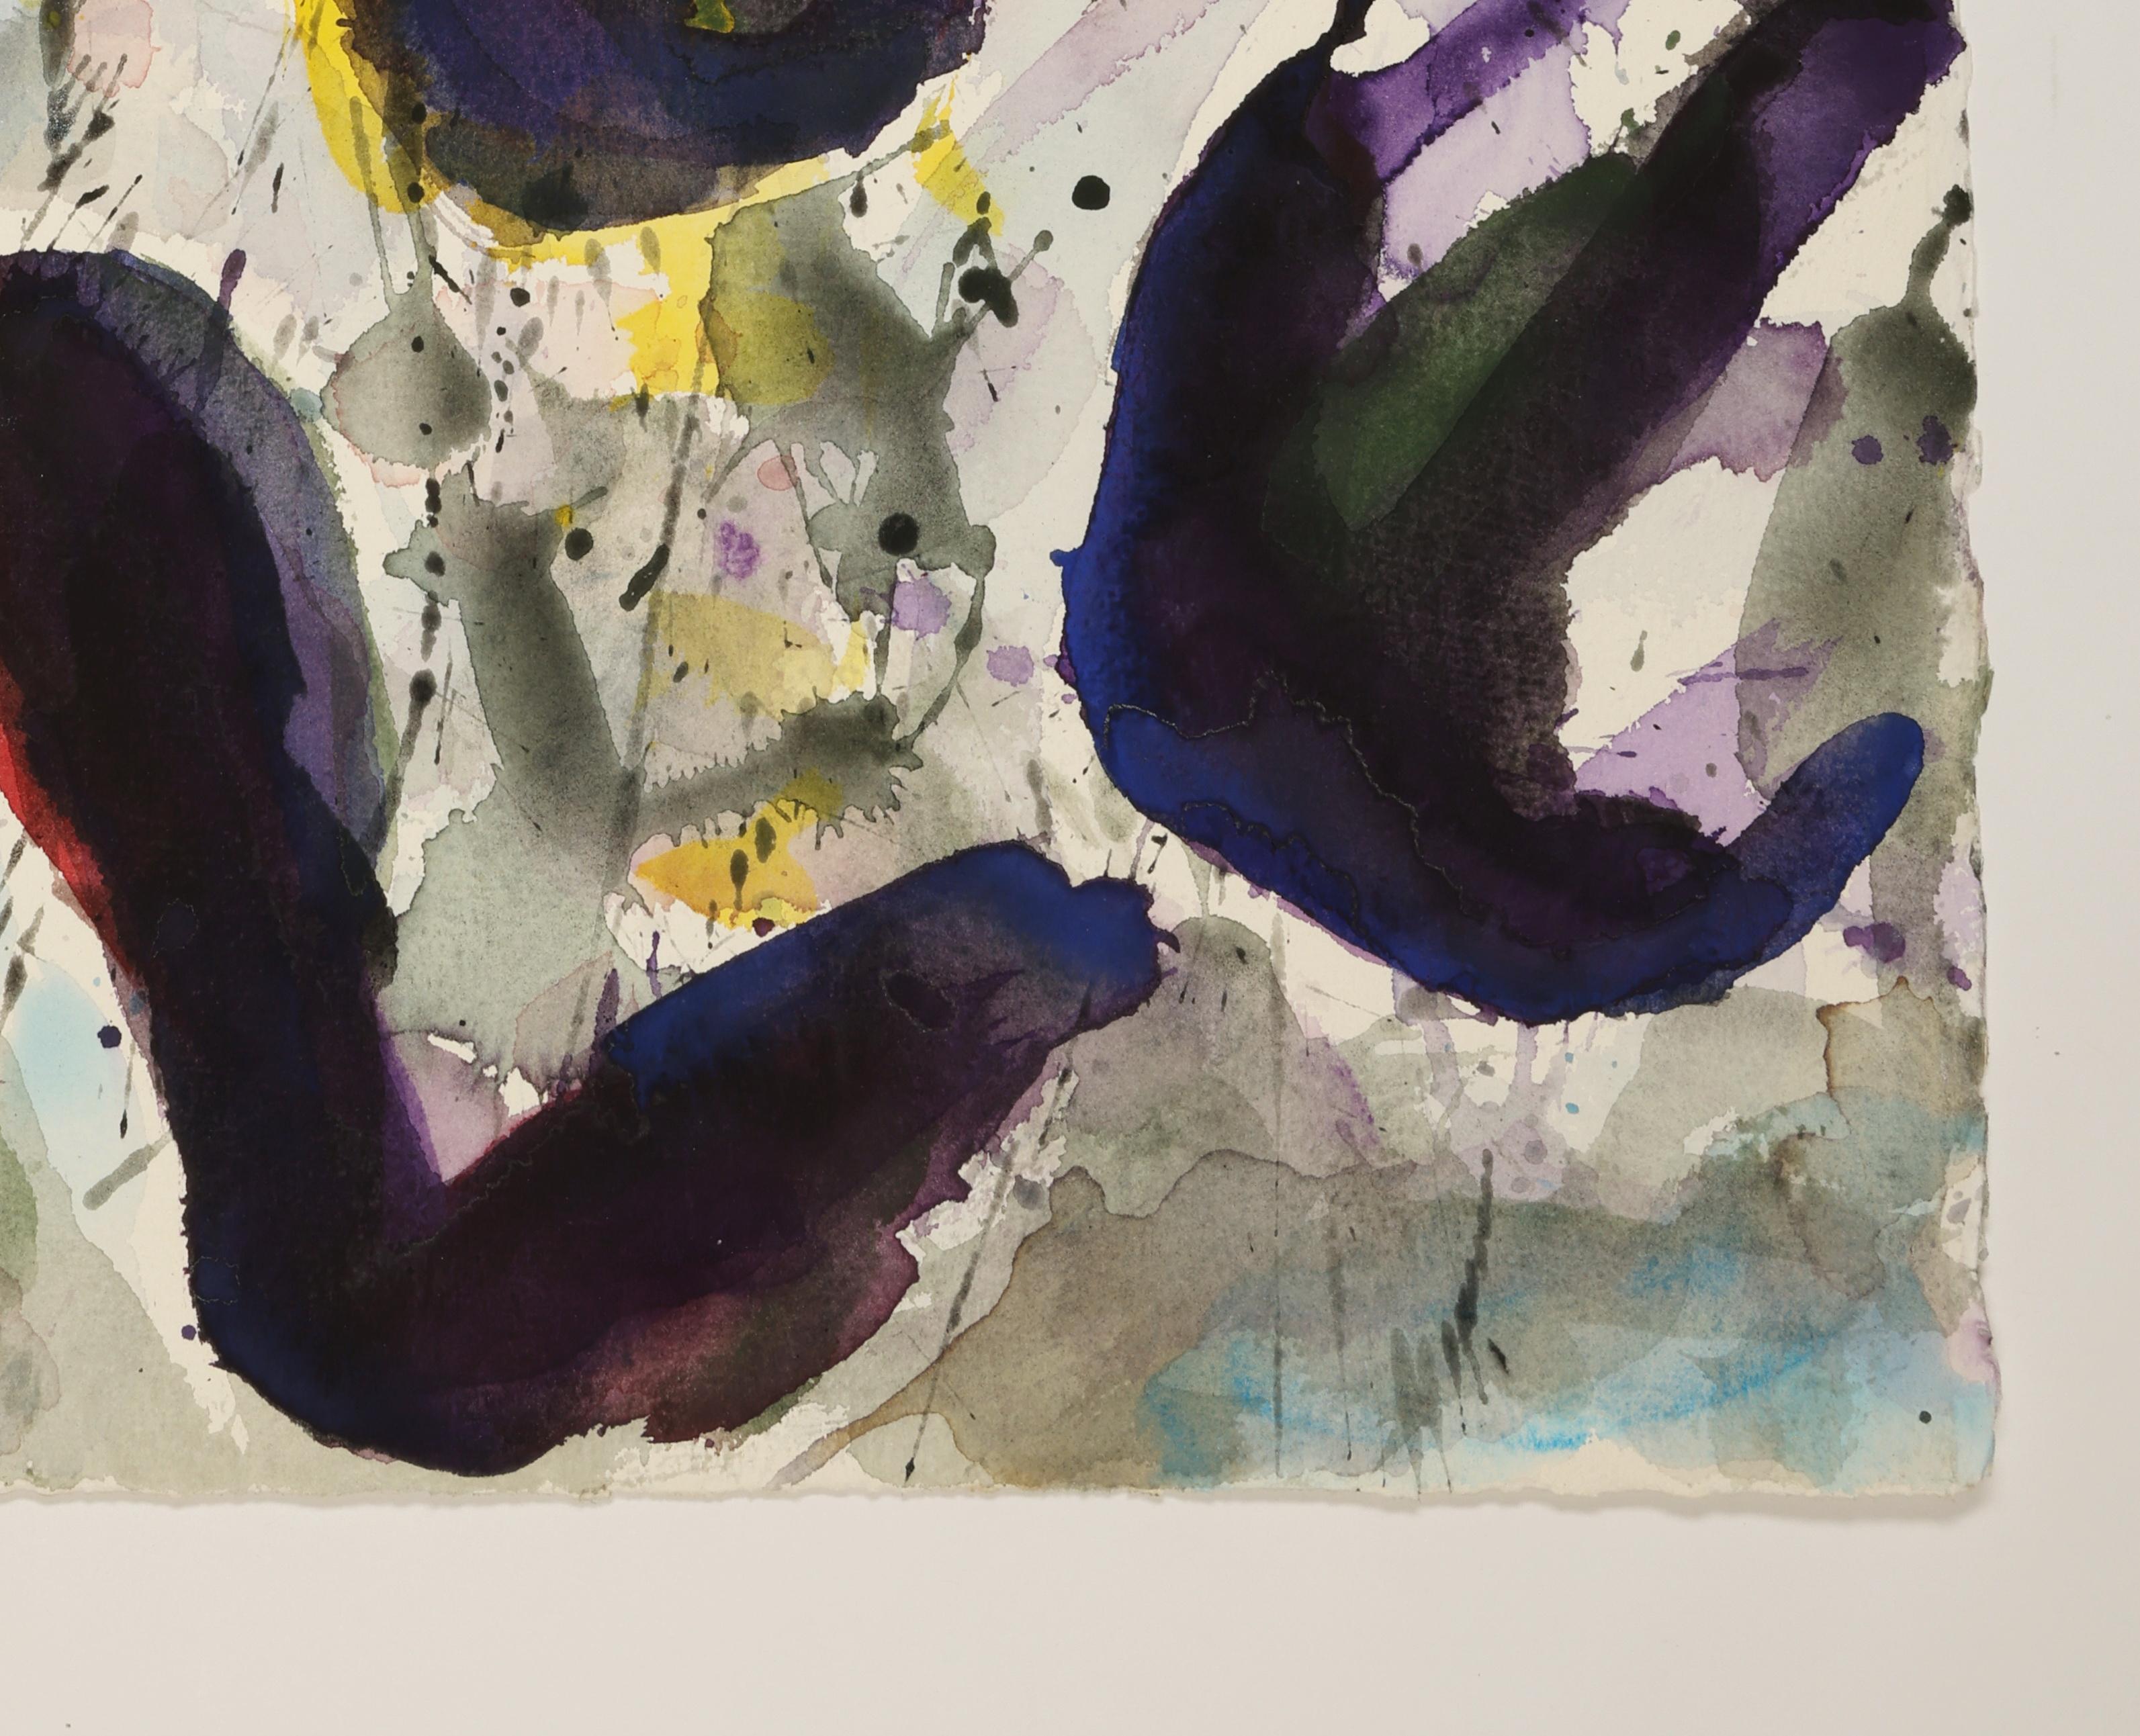 Abstract Watercolor Painting, 'Design for Space', C. 1998 by David Ruth For Sale 2